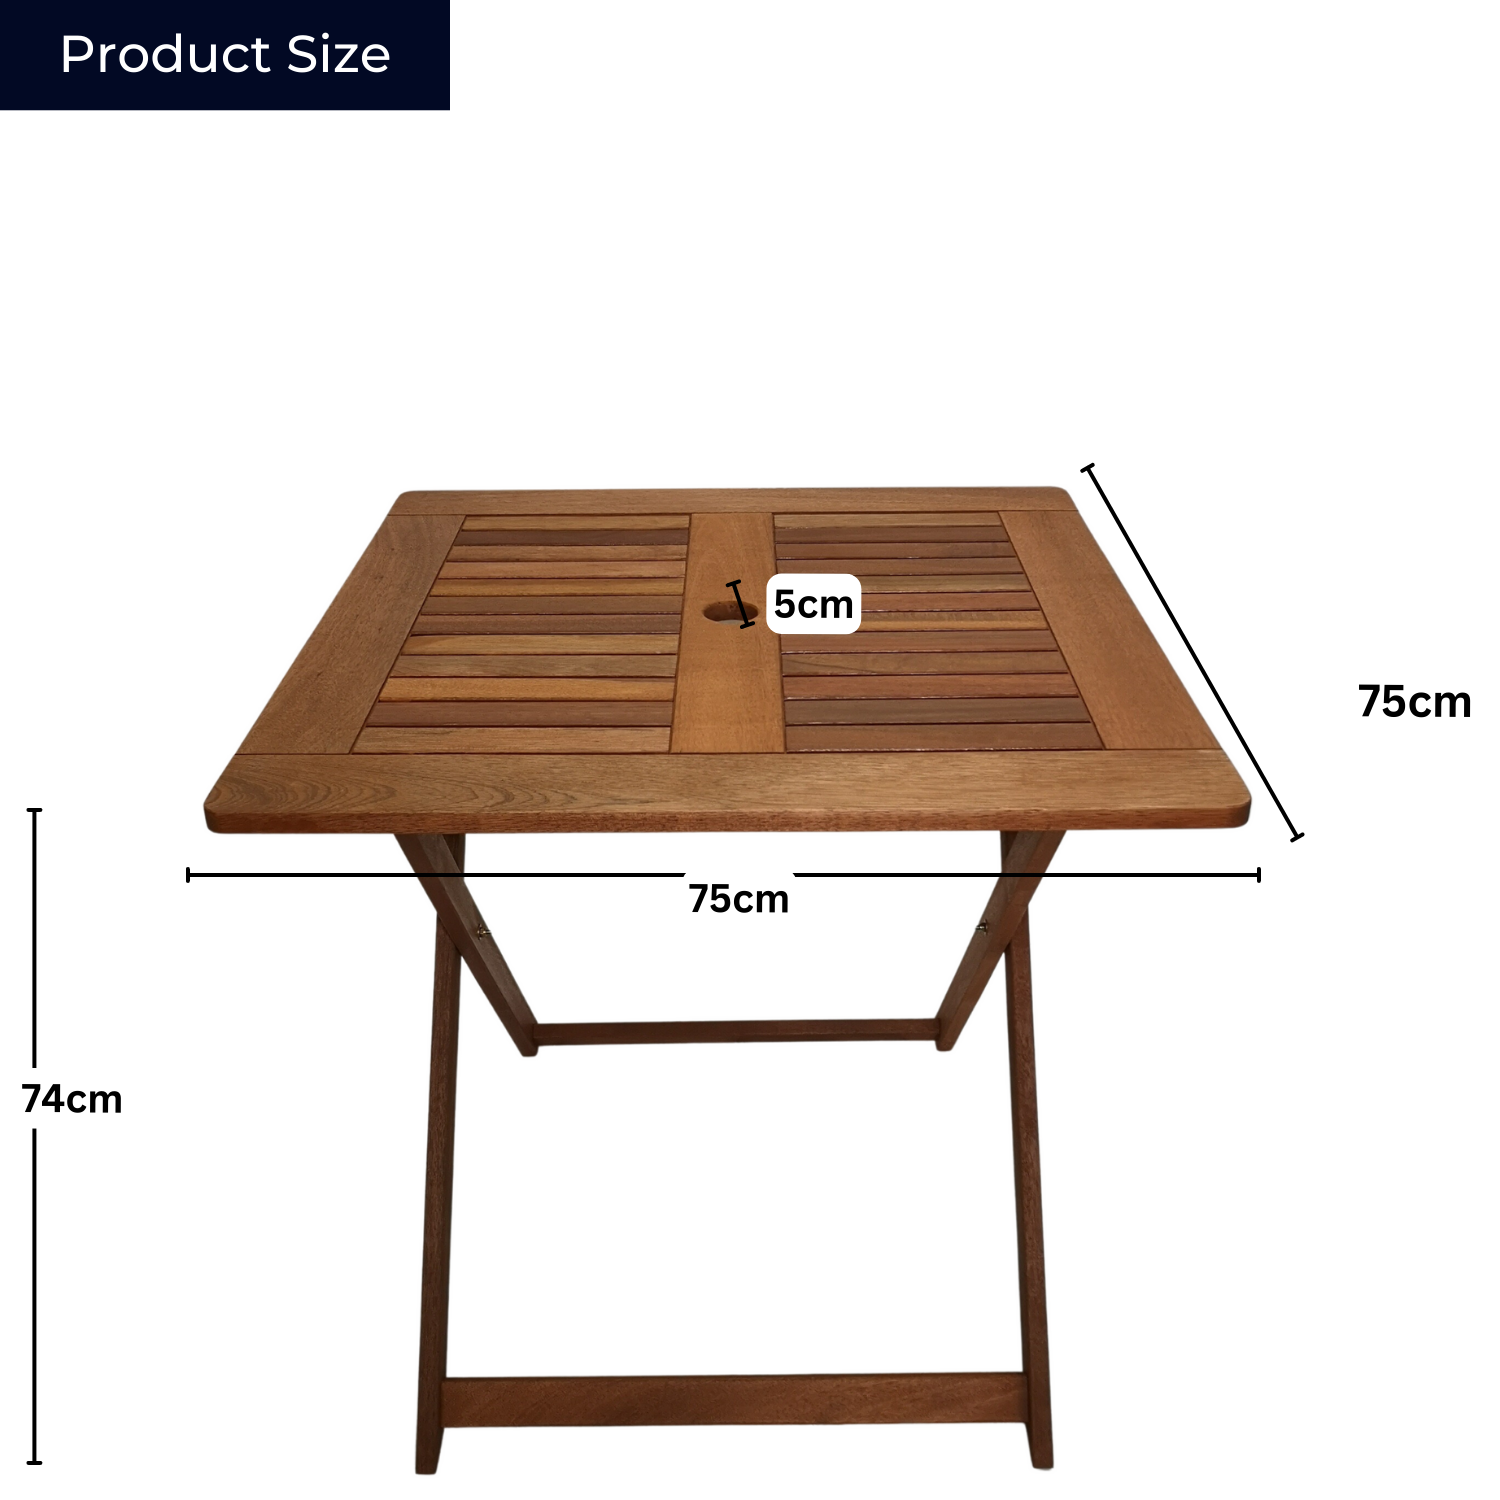 Windermere Outdoor 4 Person Folding Square Wooden Table